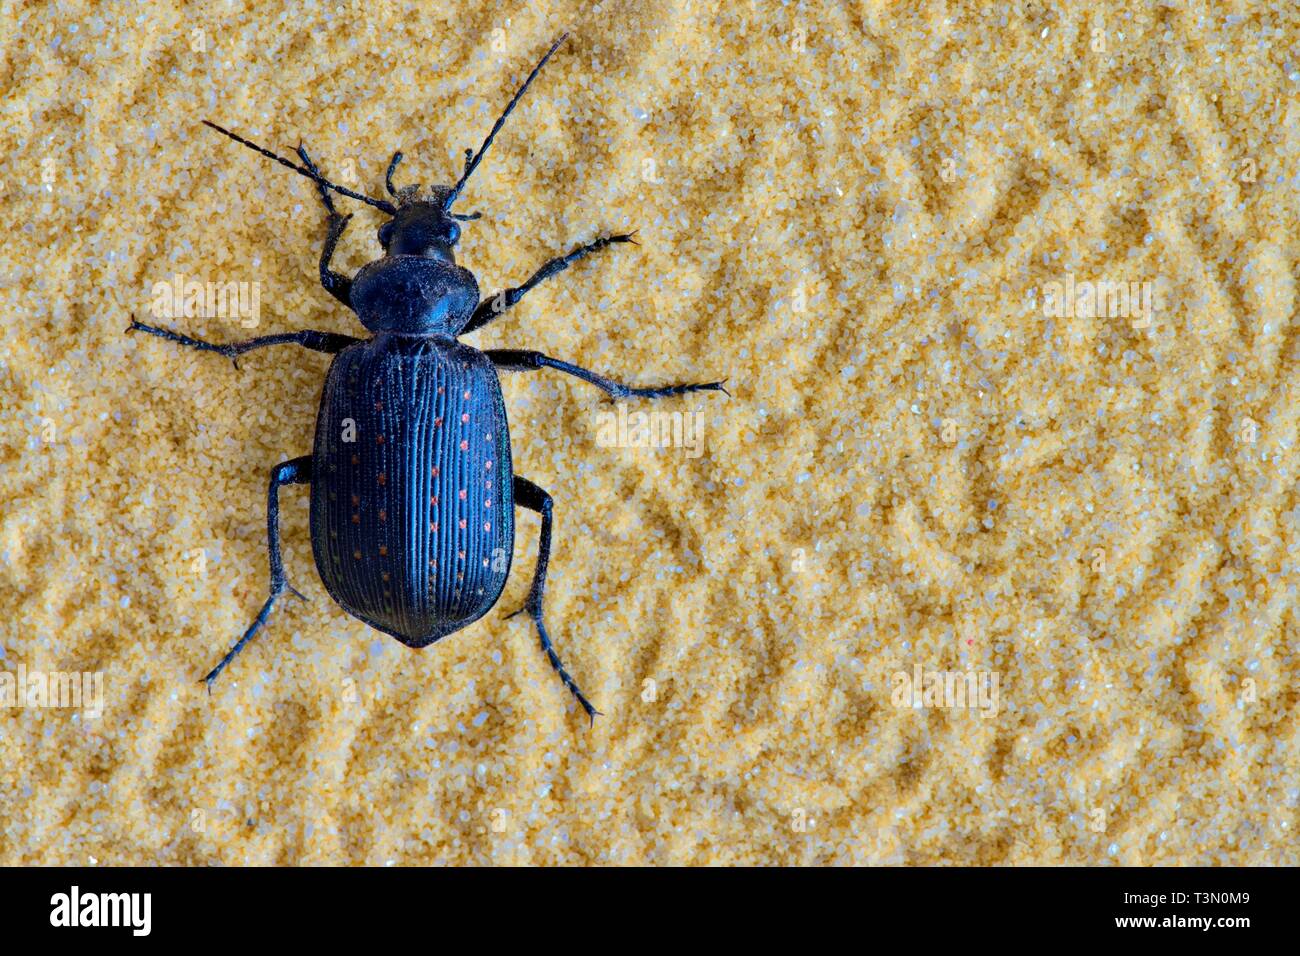 A black Fiery Hunter beetle (Callisthenes calidus) macro, isolated on a background of fine sand with negative space on the right. Stock Photo